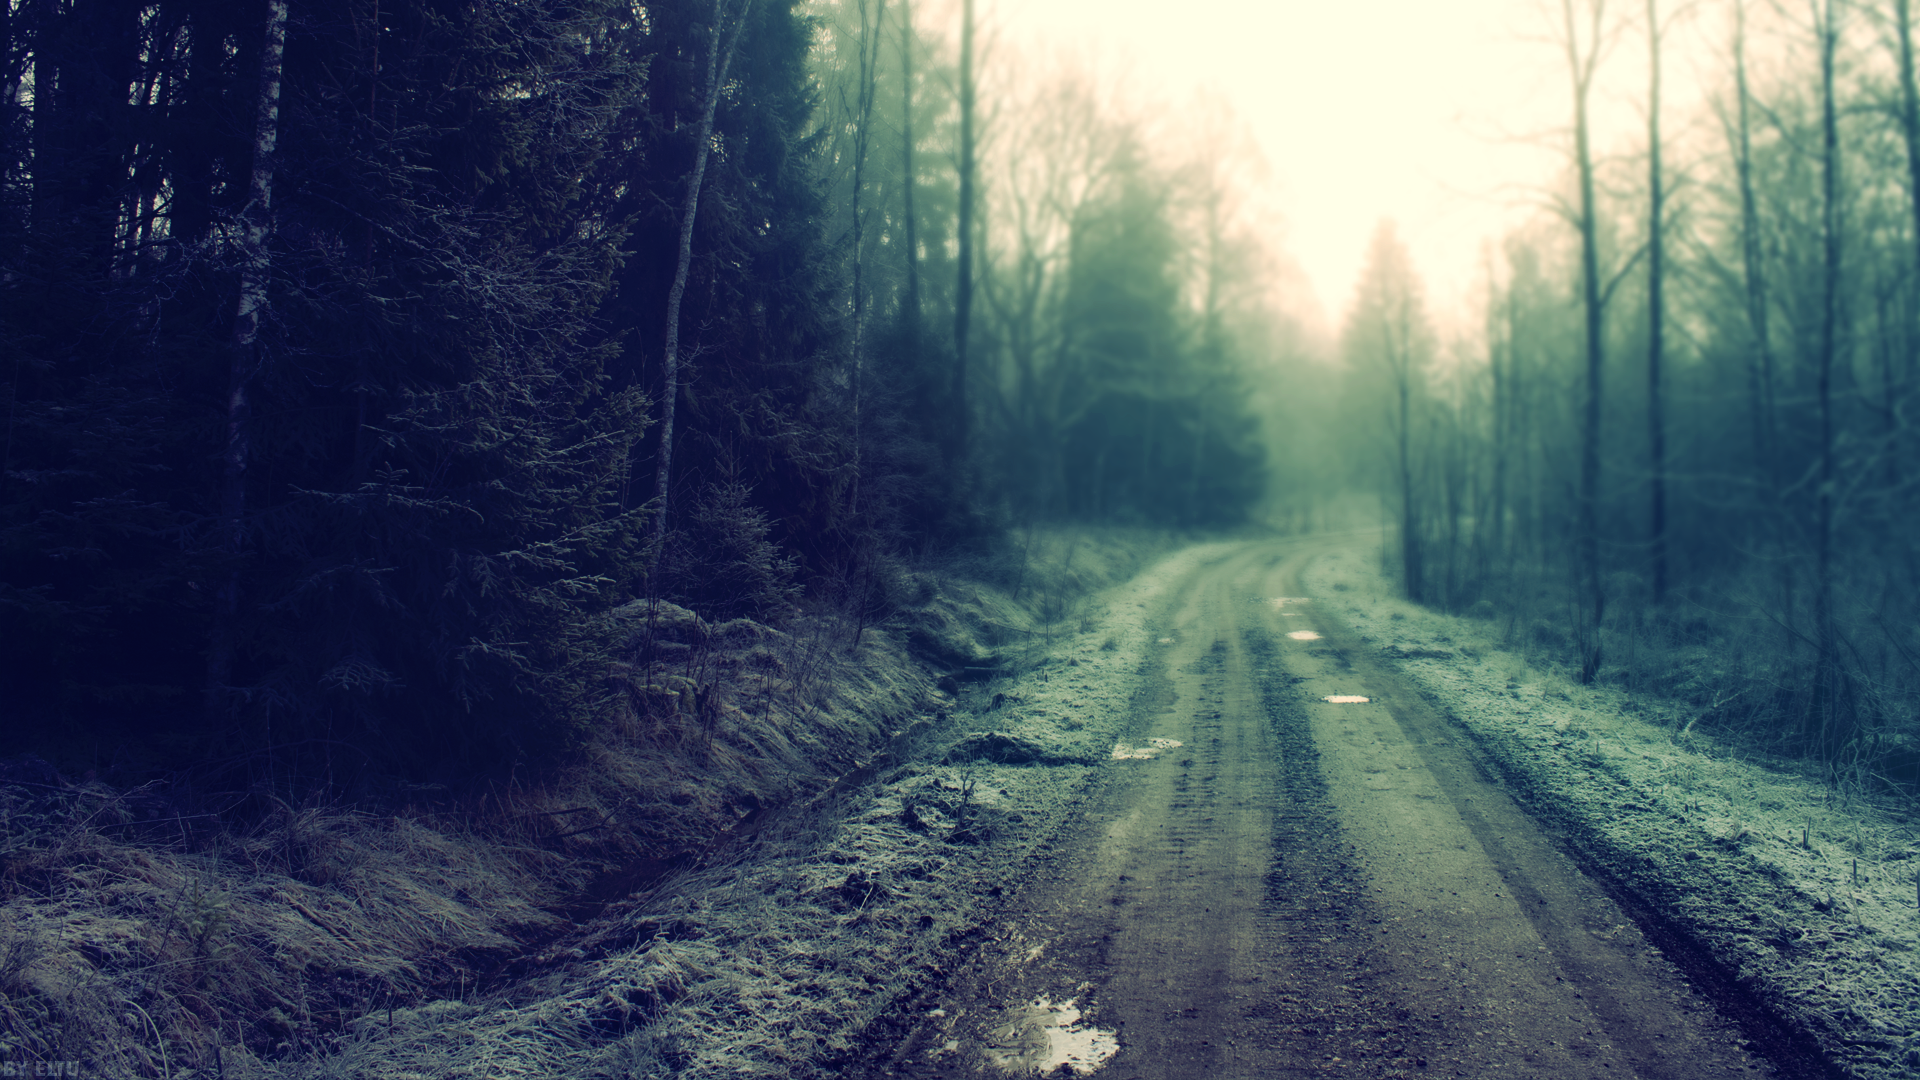 General 1920x1080 road trees forest mist dirty forest clearing path nature mud dirt road dirt